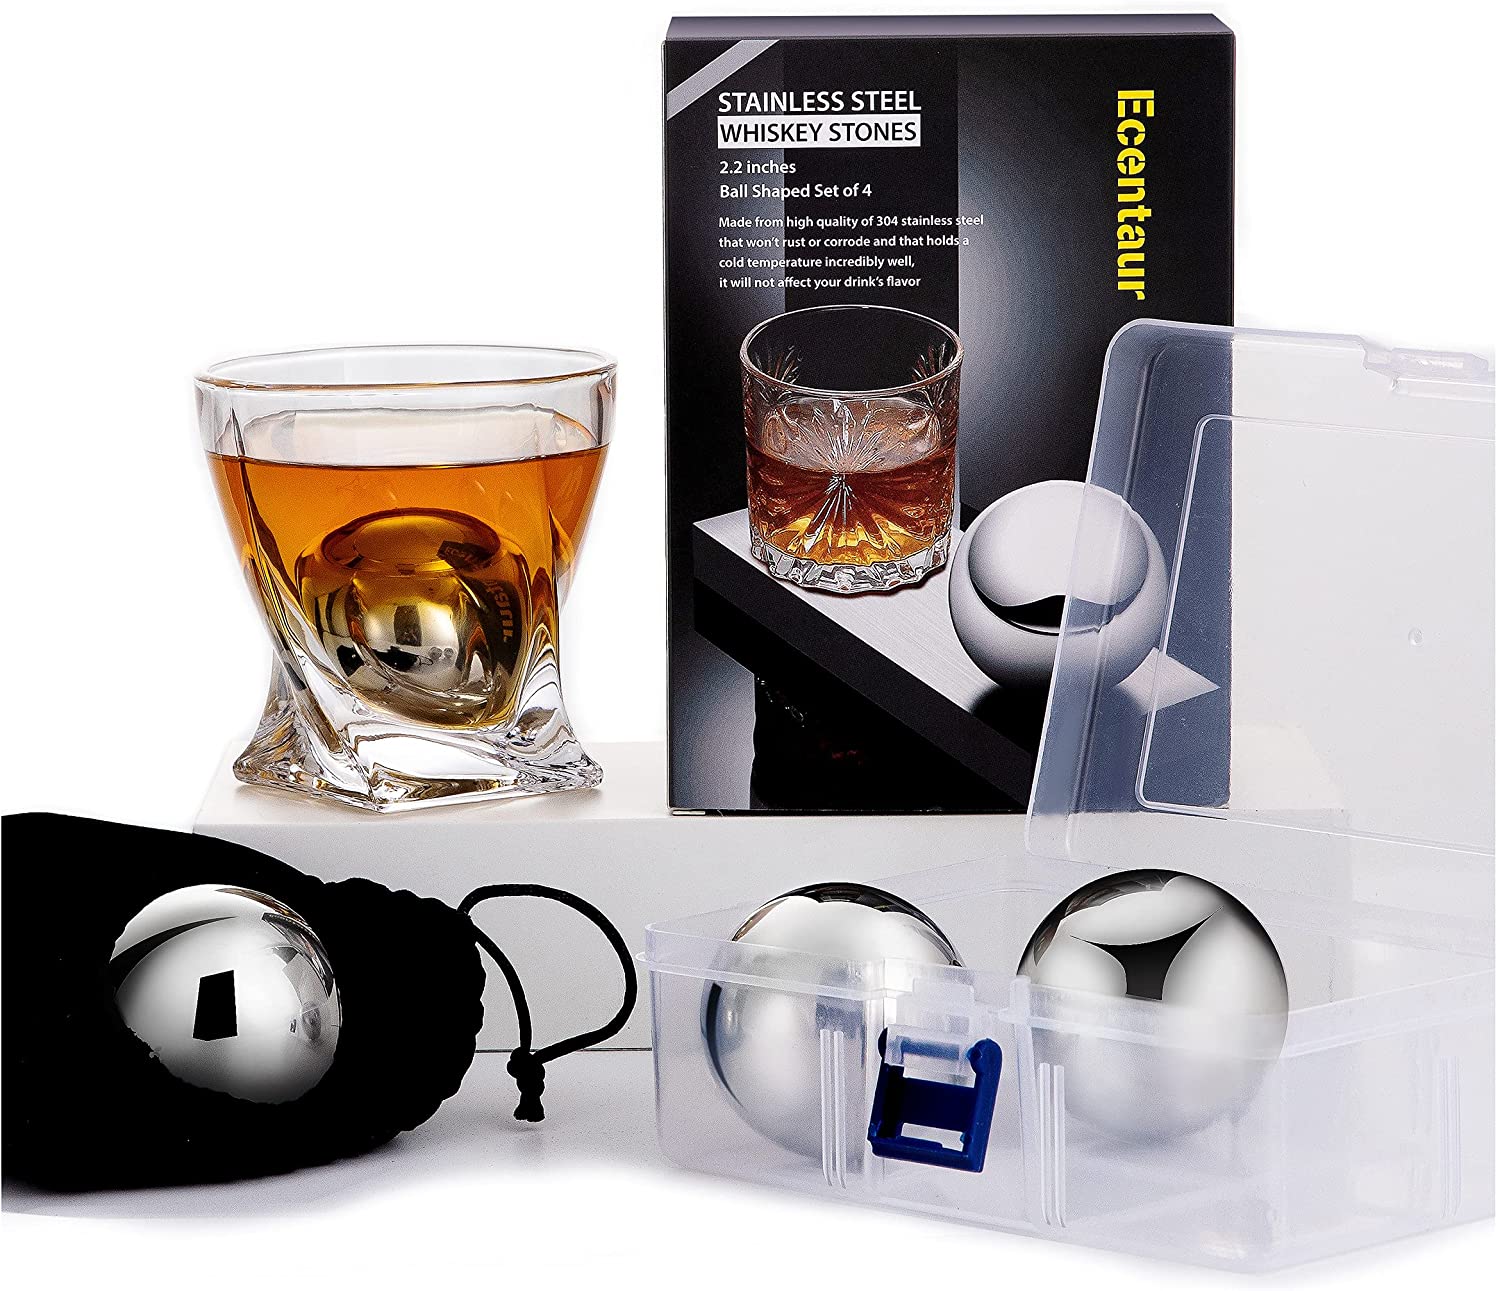 Amazon top seller Whiskey Stones Stainless Steel Ice Cube Metal Reusable Balls Featured Image